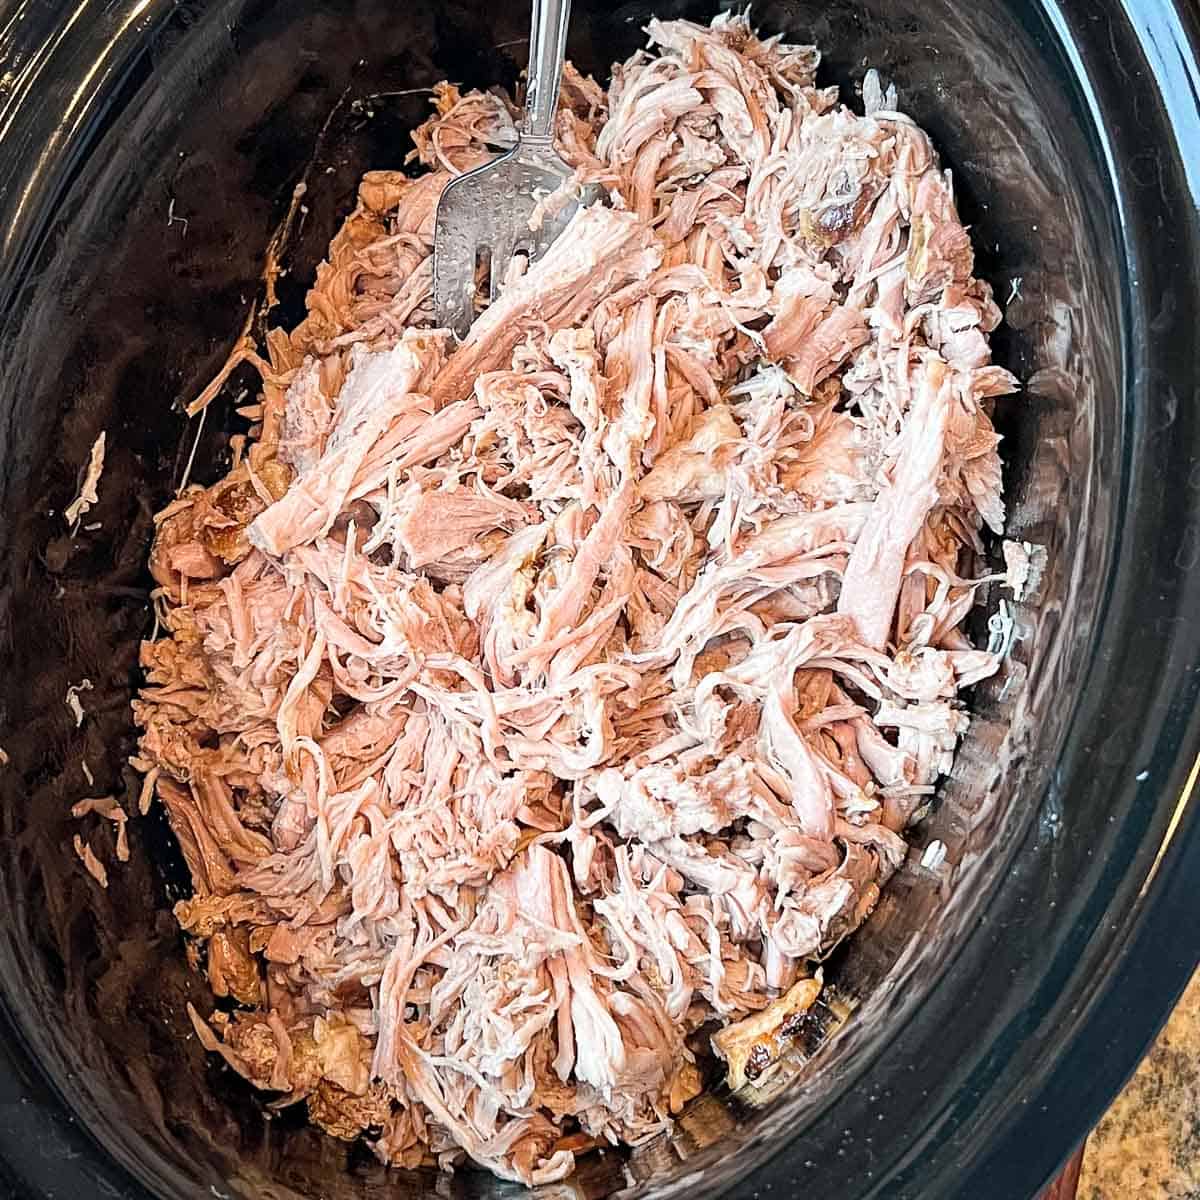 Shredded pulled pork in a crock pot with a fork.